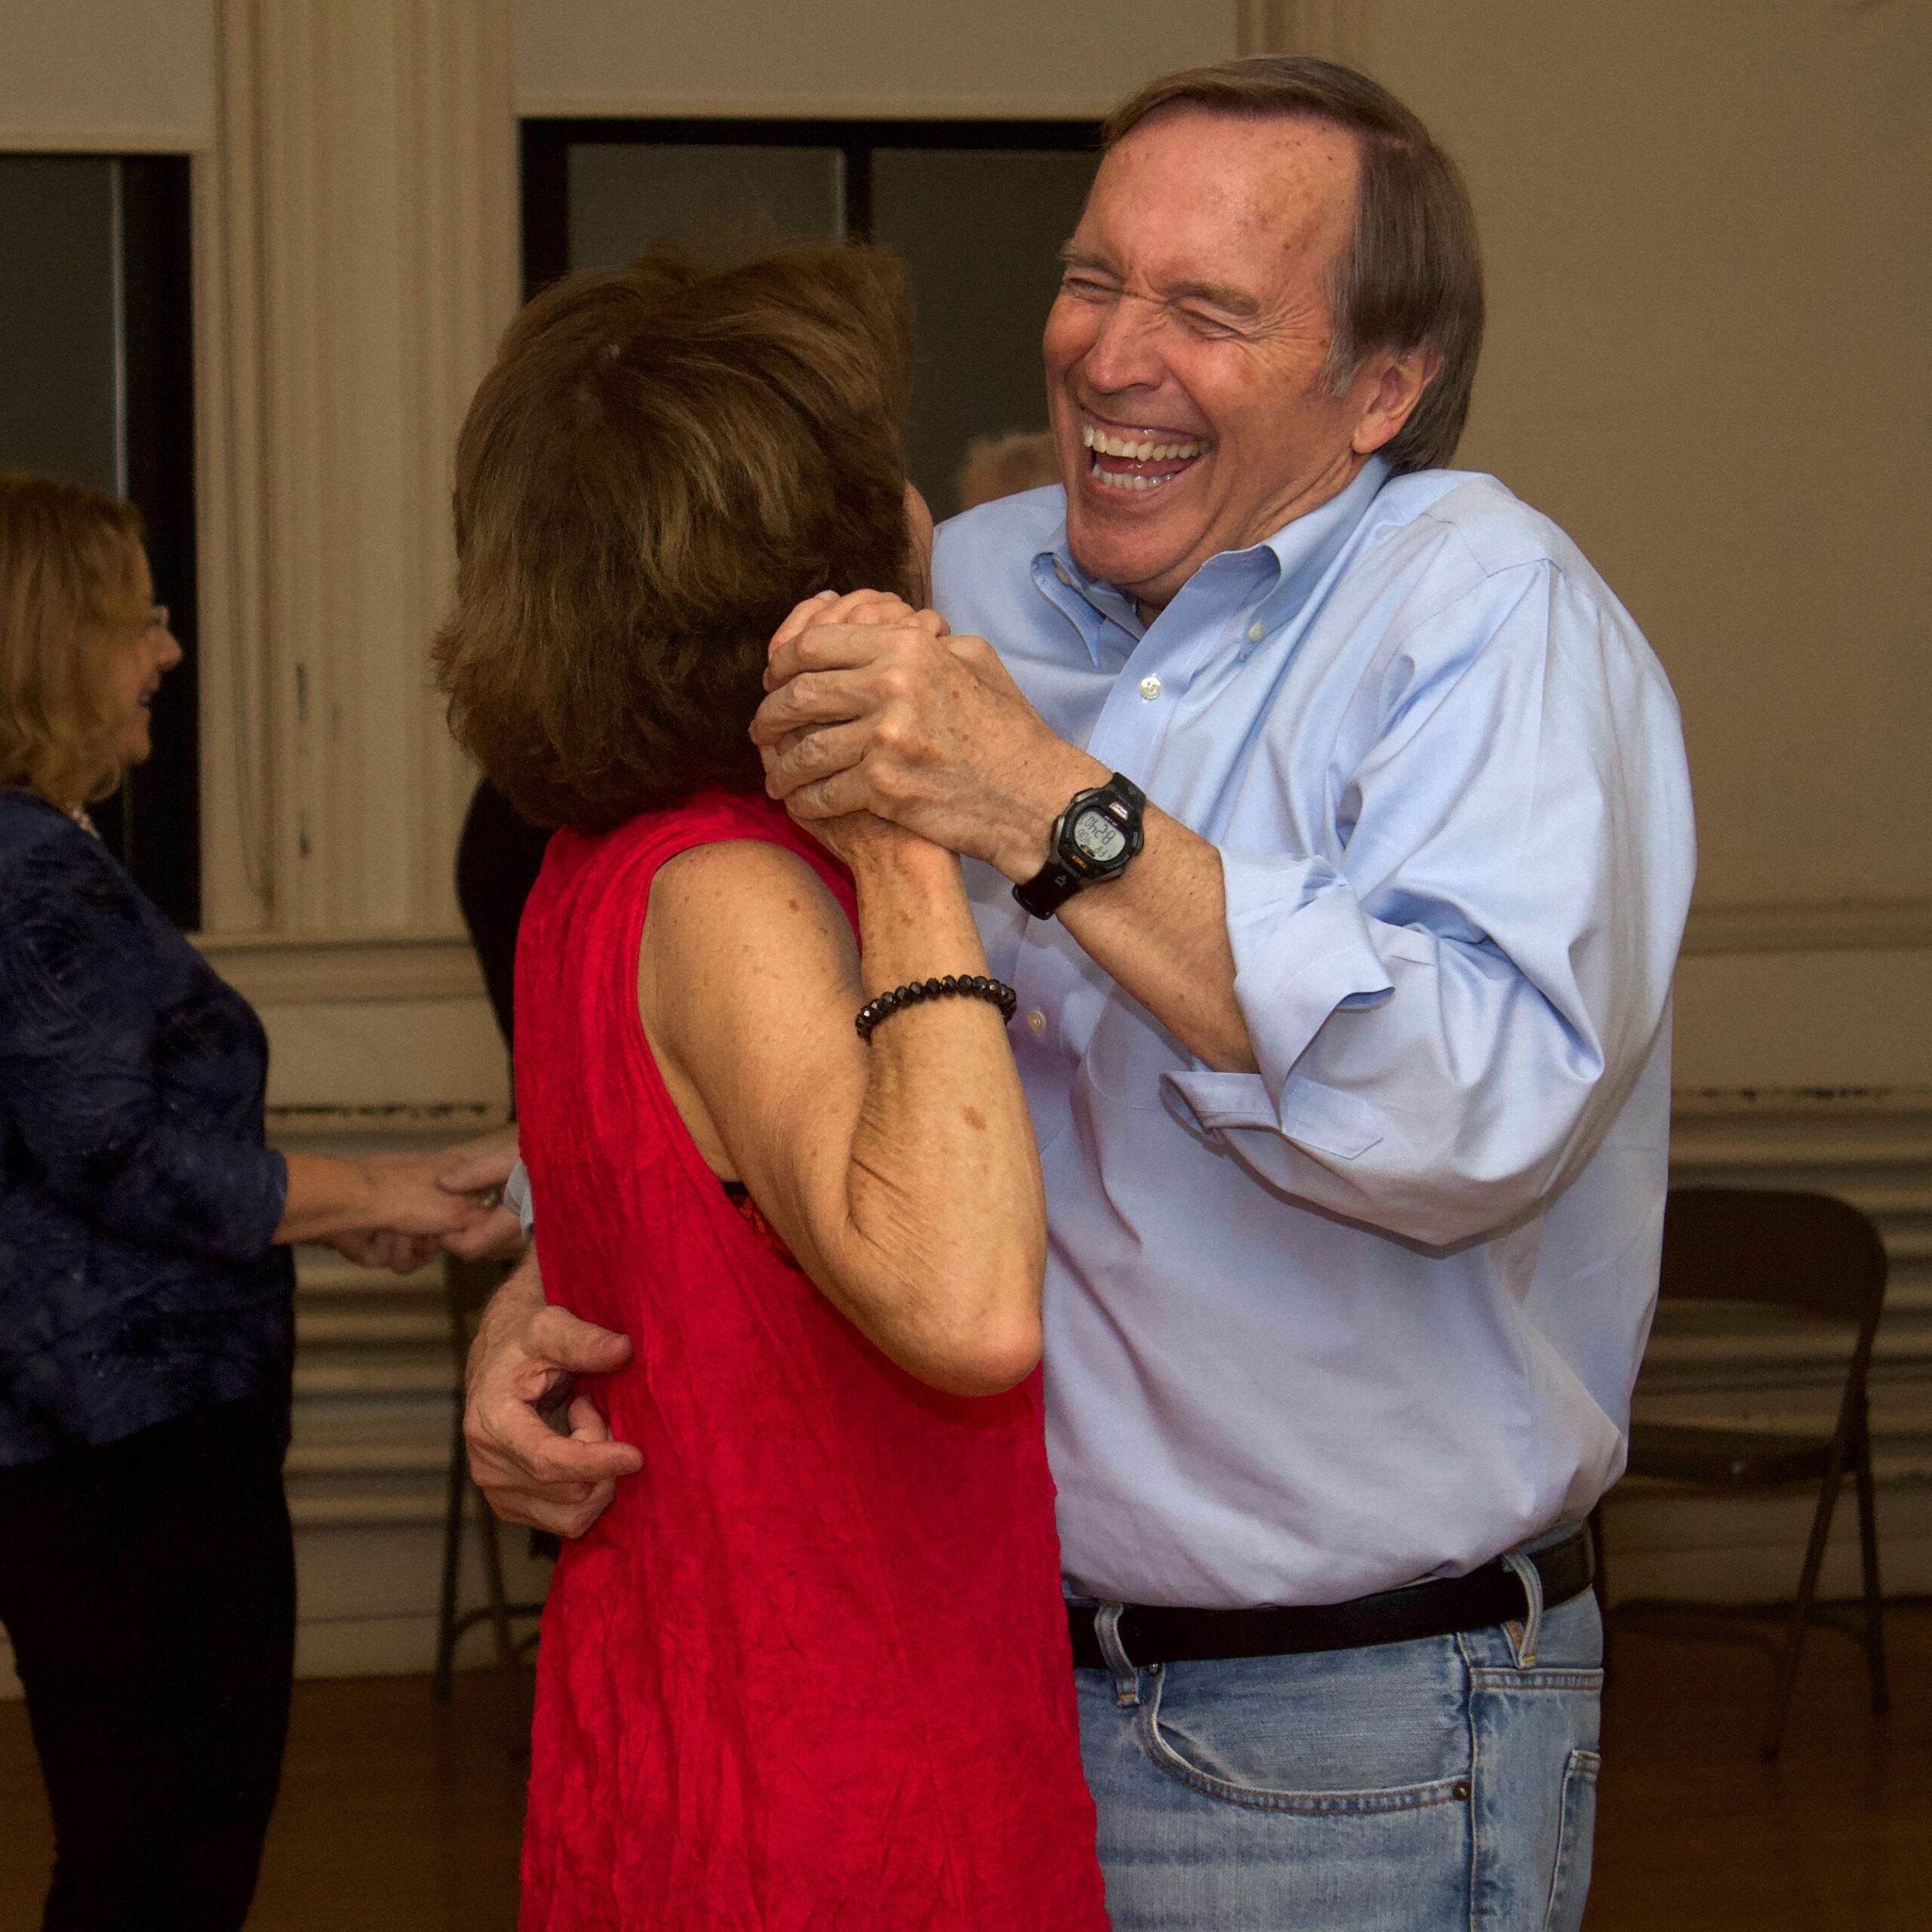 A man and woman laugh as they dancer together.